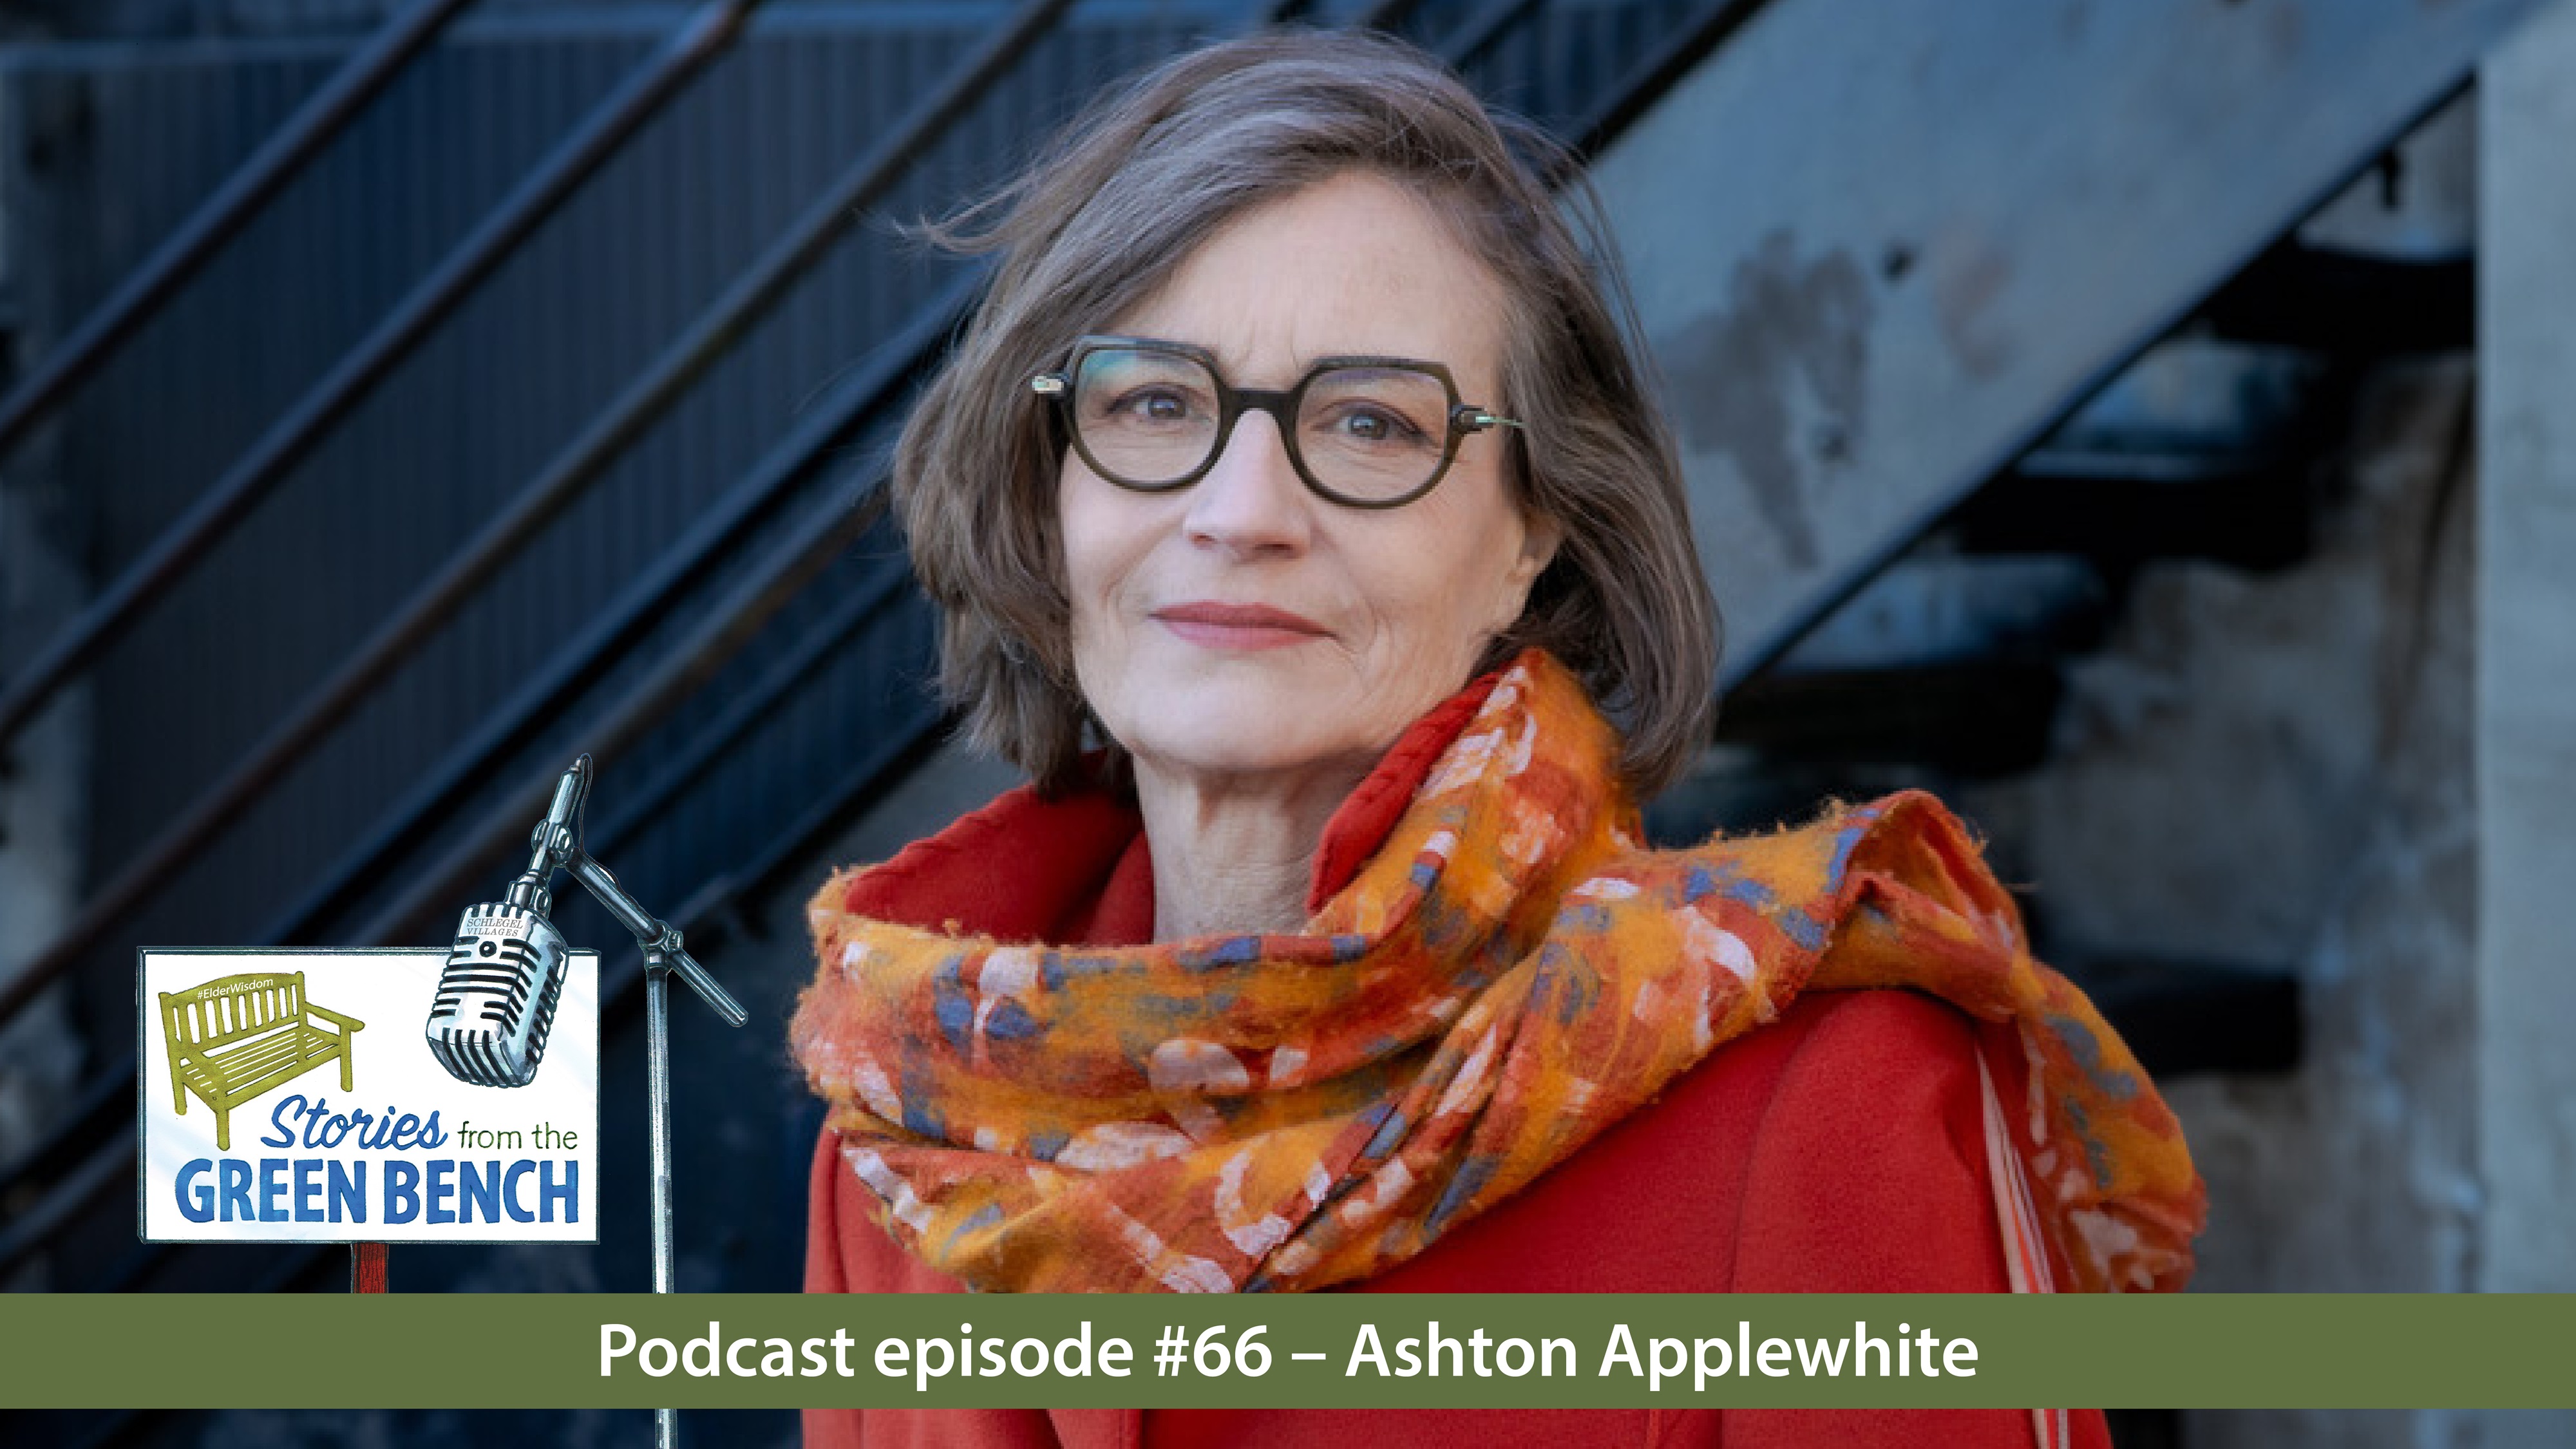 Author and speaker Ashton Applewhite shares her story from the green bench on our podcast